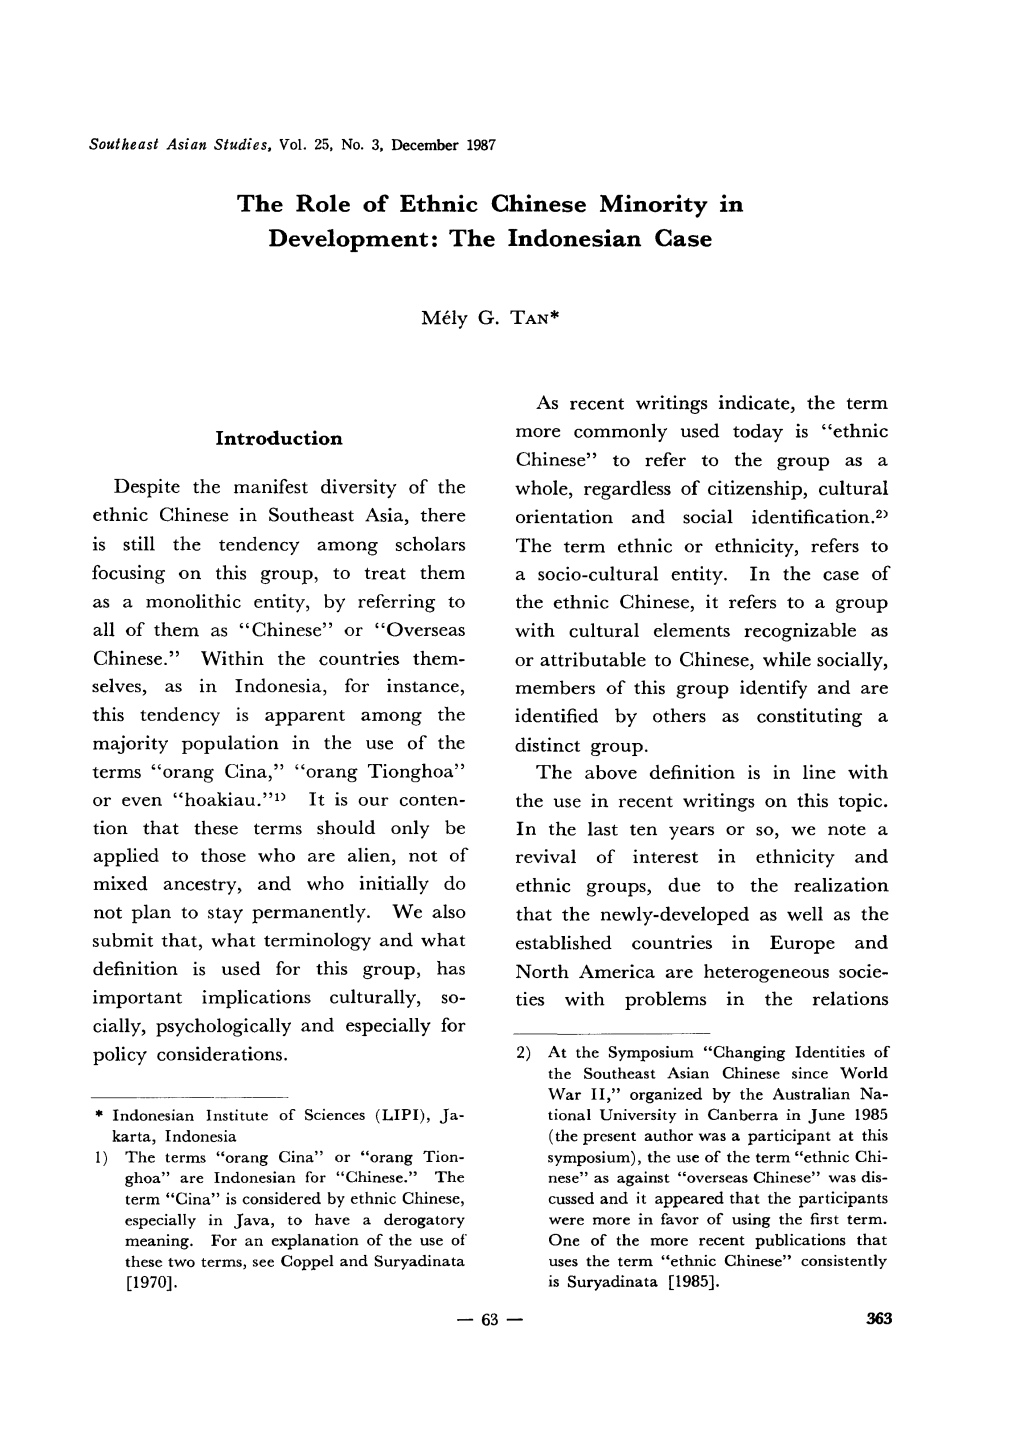 The Role of Ethnic Chinese Minority in Developntent: the Indonesian Case